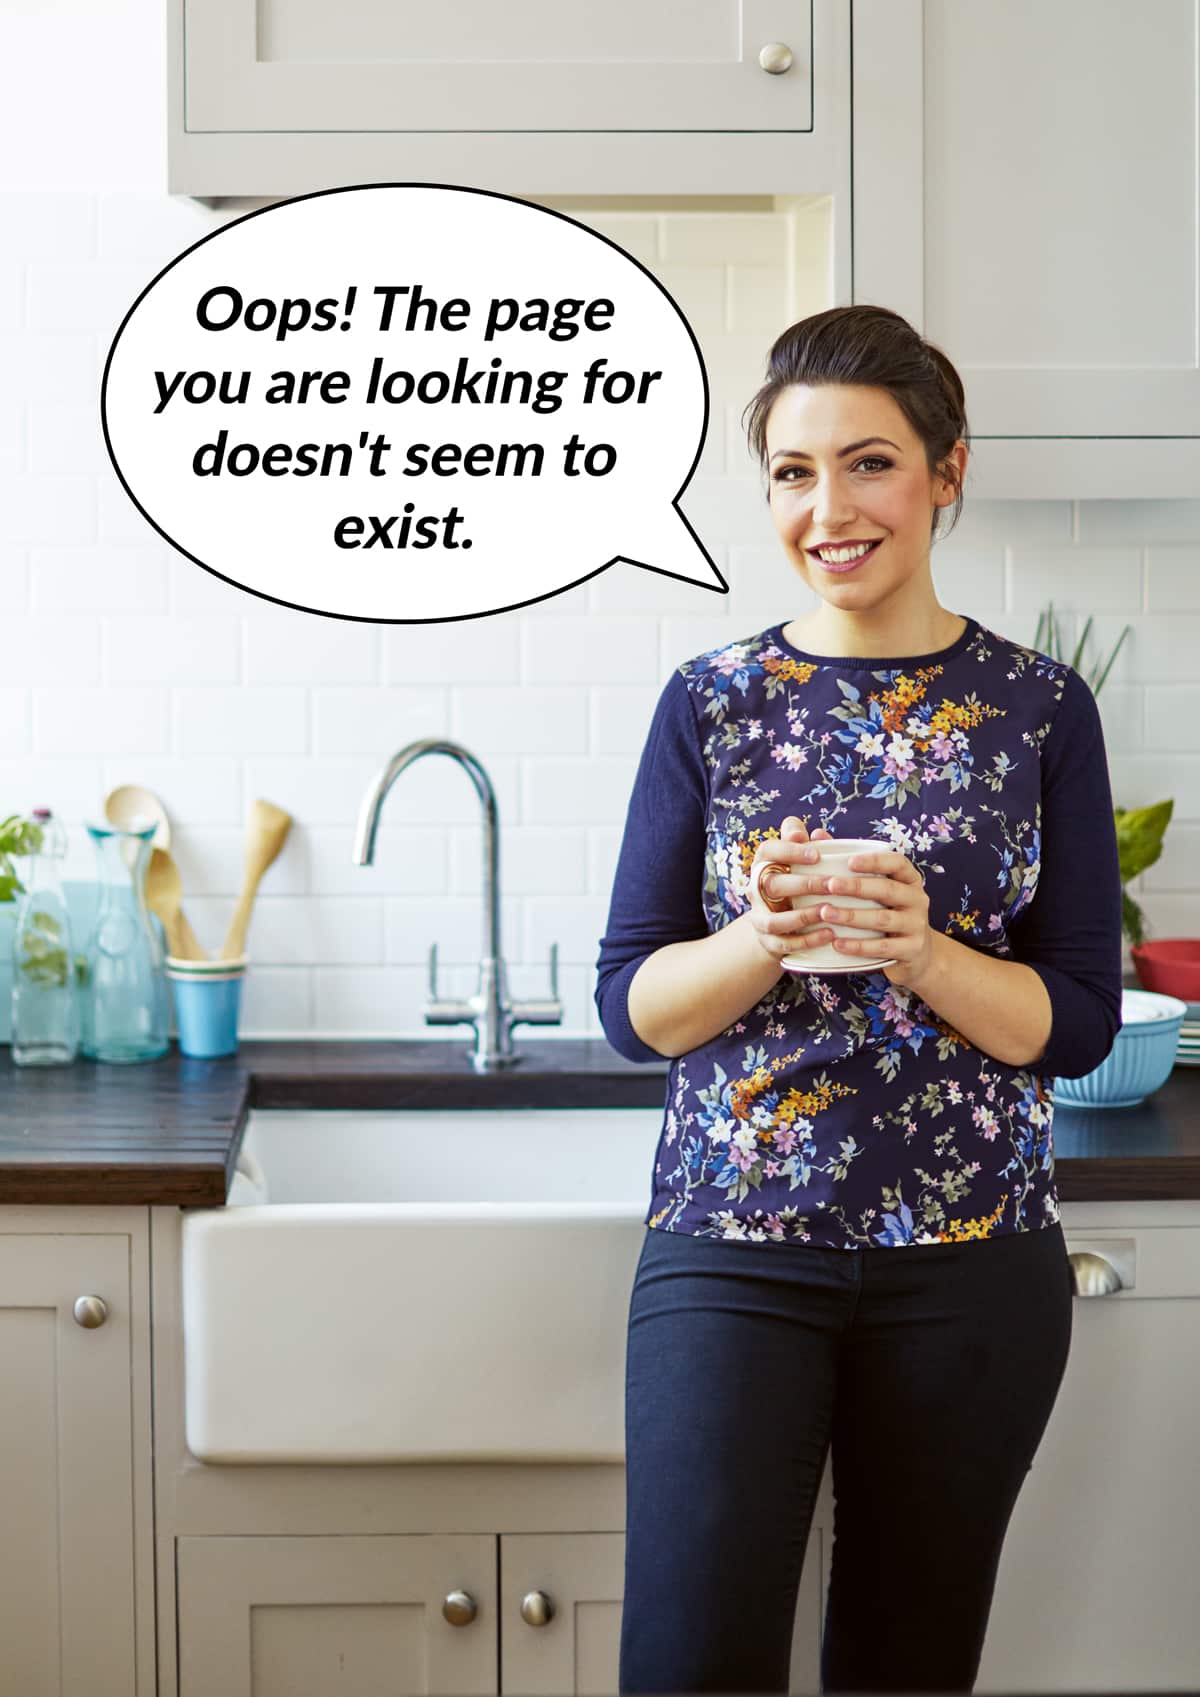 Woman leaning against a worktop in a kitchen. A speech bubble reads, "Oops! The page you are looking for doesn't seem to exist."